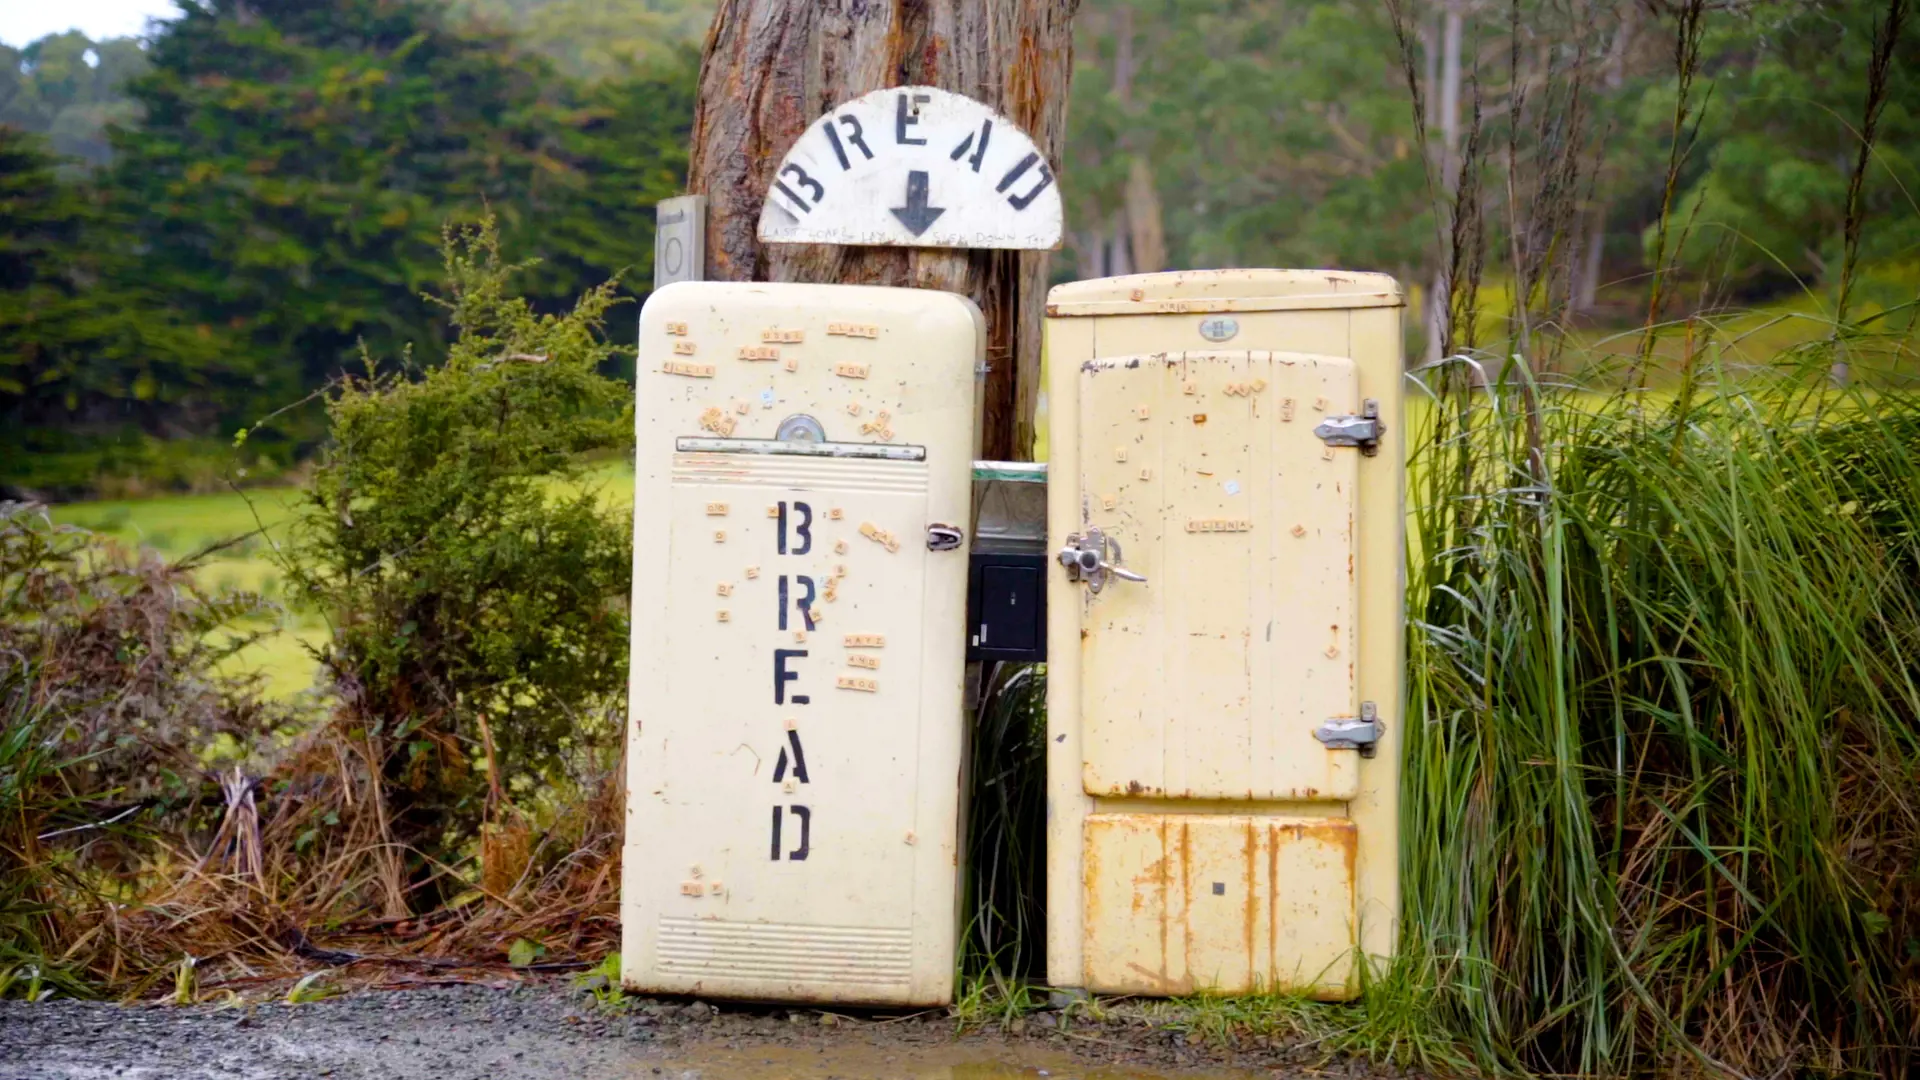 Two old fridges, one with the word 'bread' stenciled in black onto it, stand on the side of a road under a tree.